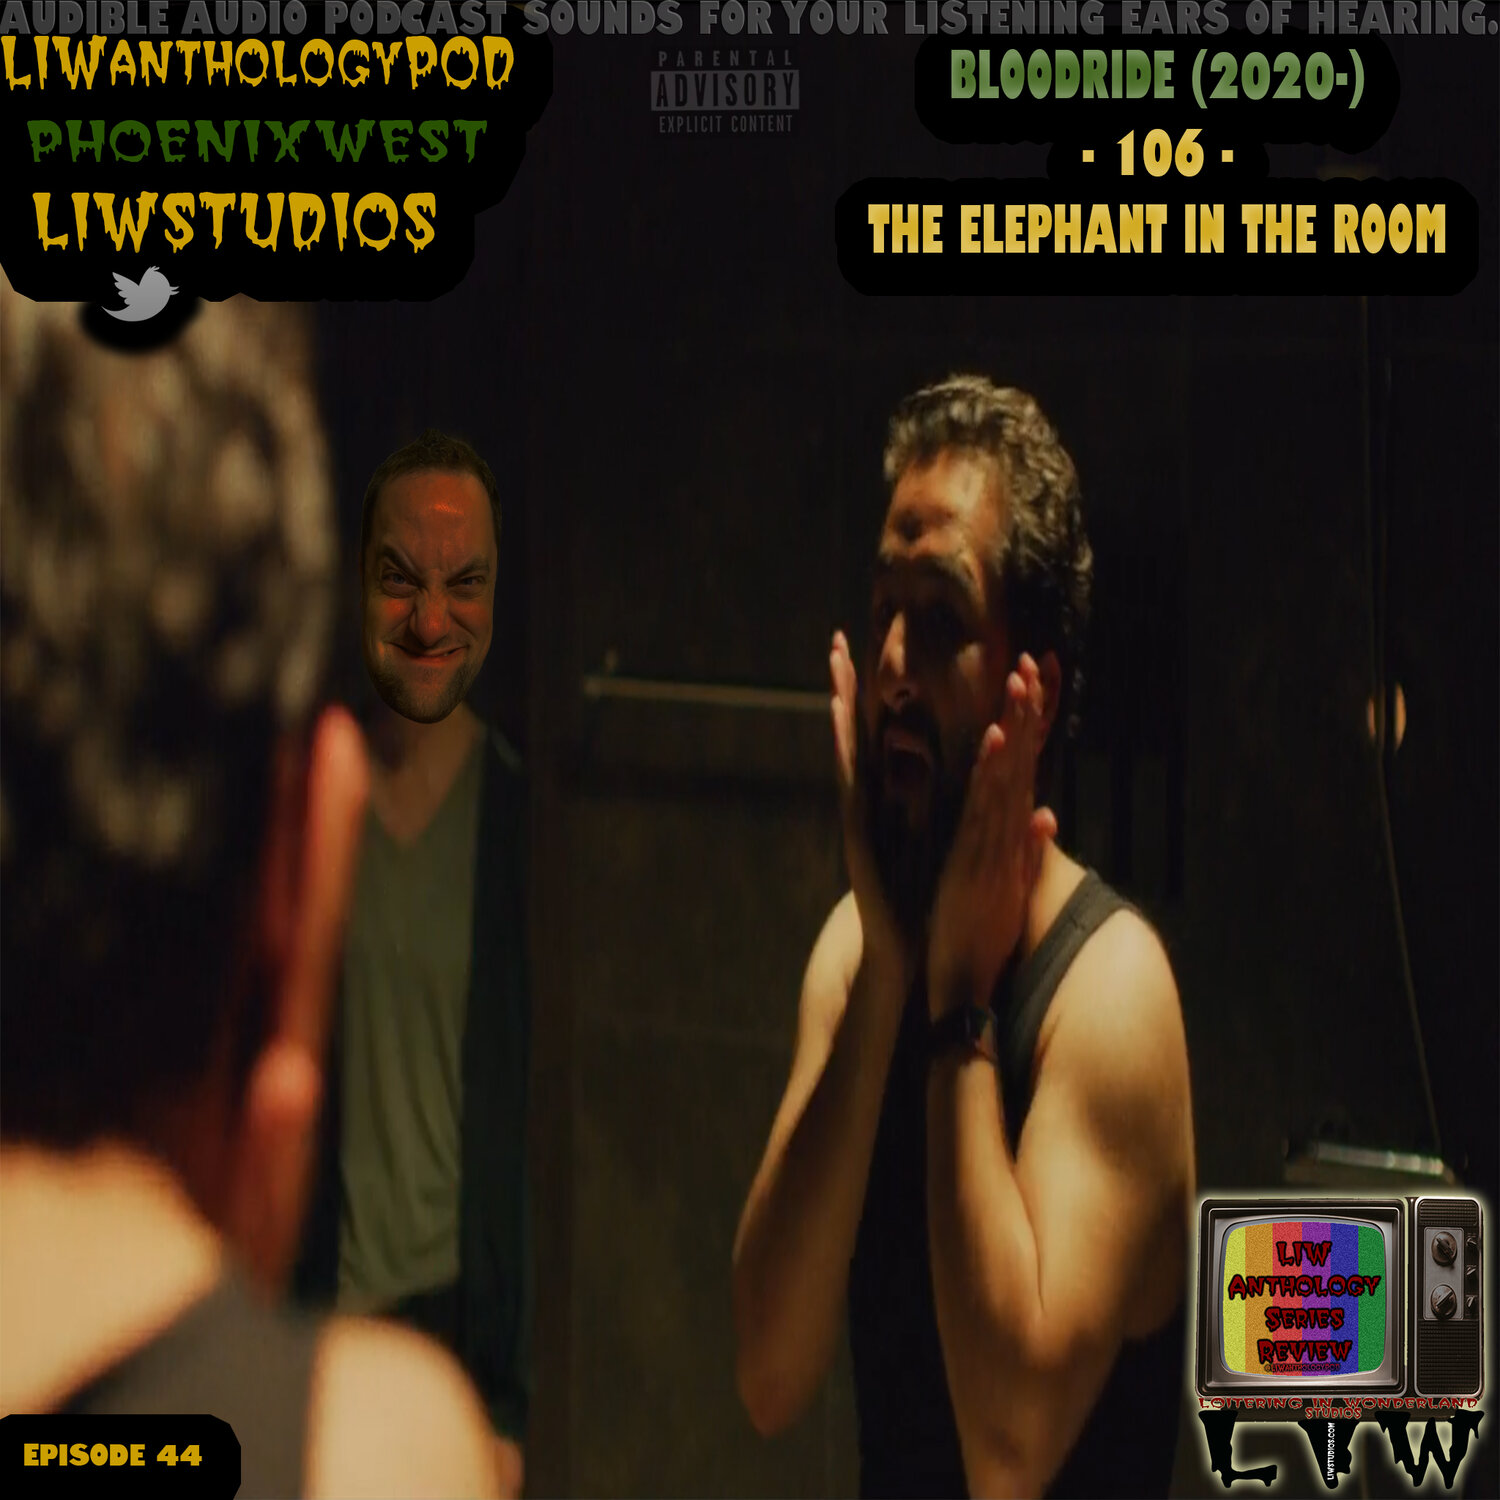 44: Bloodride - 106 - The Elephant In The Room